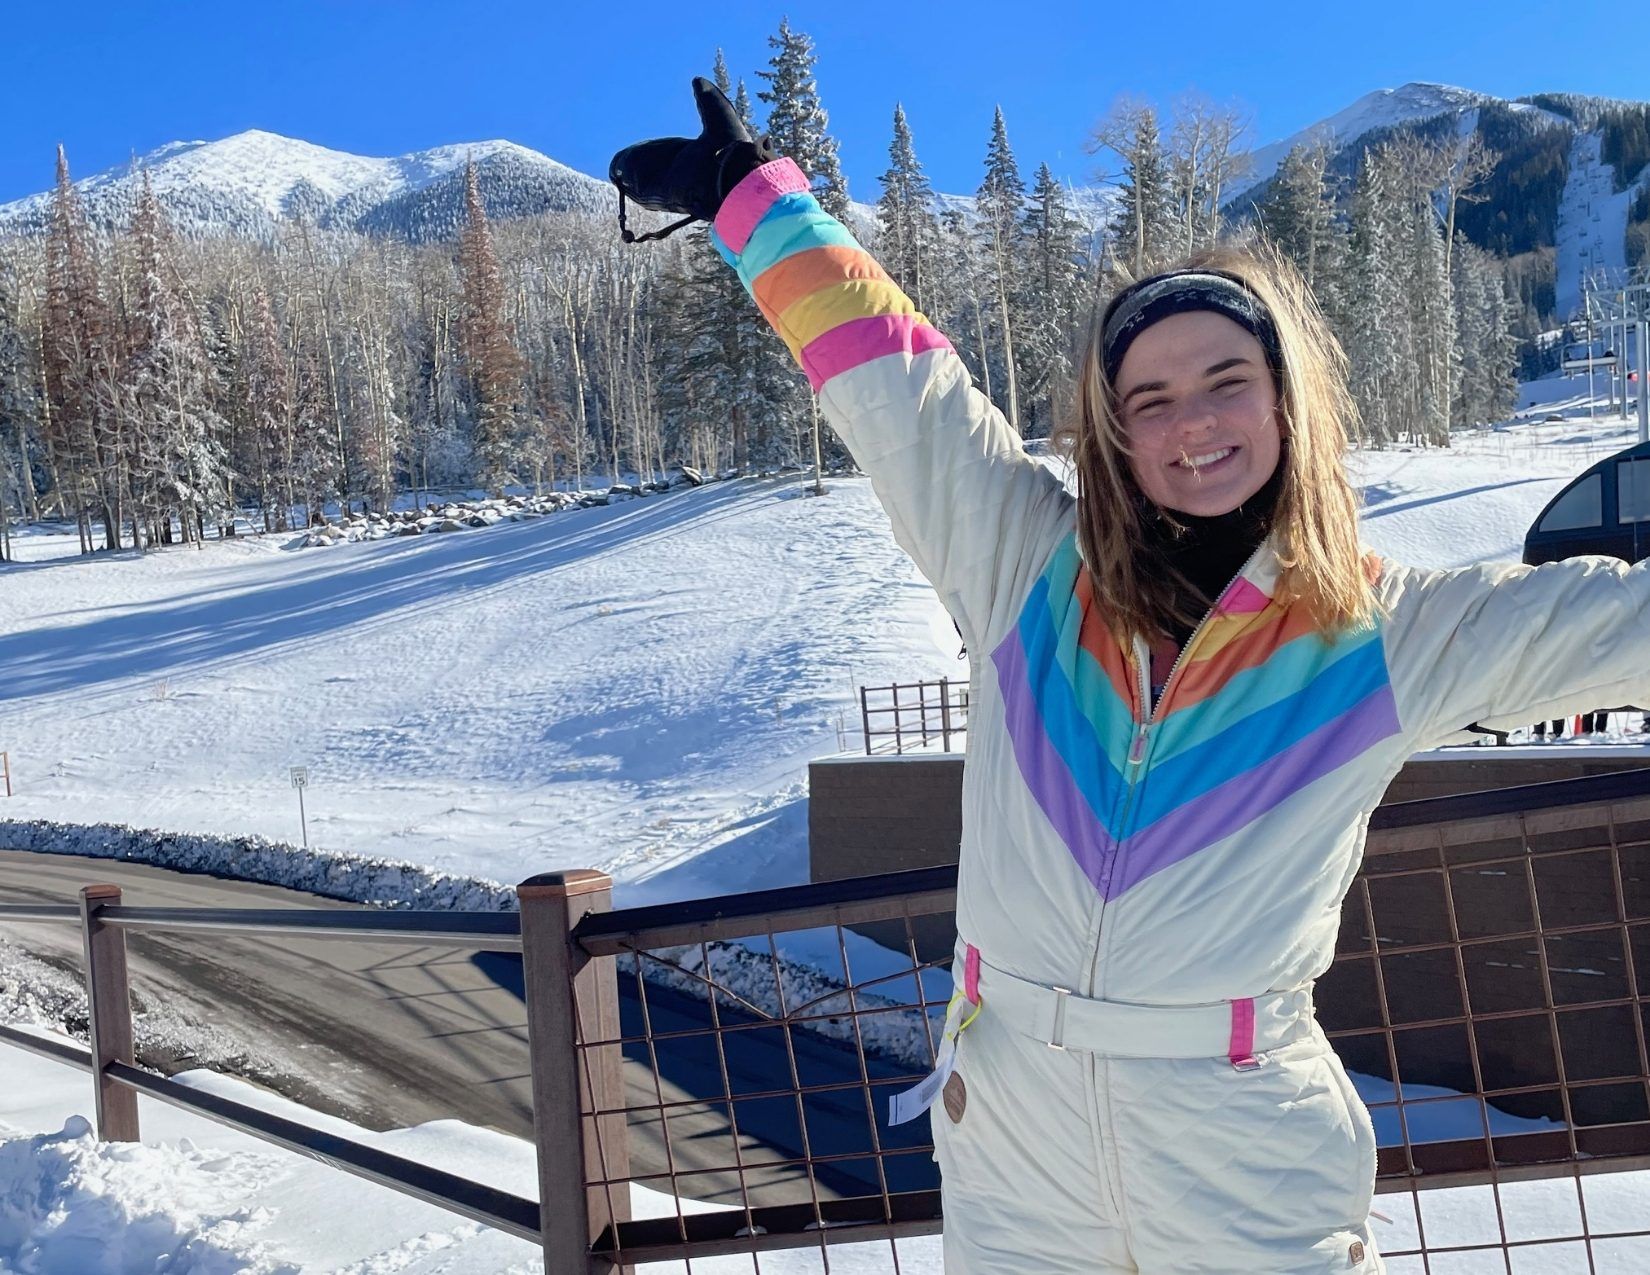 a young woman in a colorful snowsuit smiling in front of snowy mountains at a ski resort in Flagstaff, Arizona